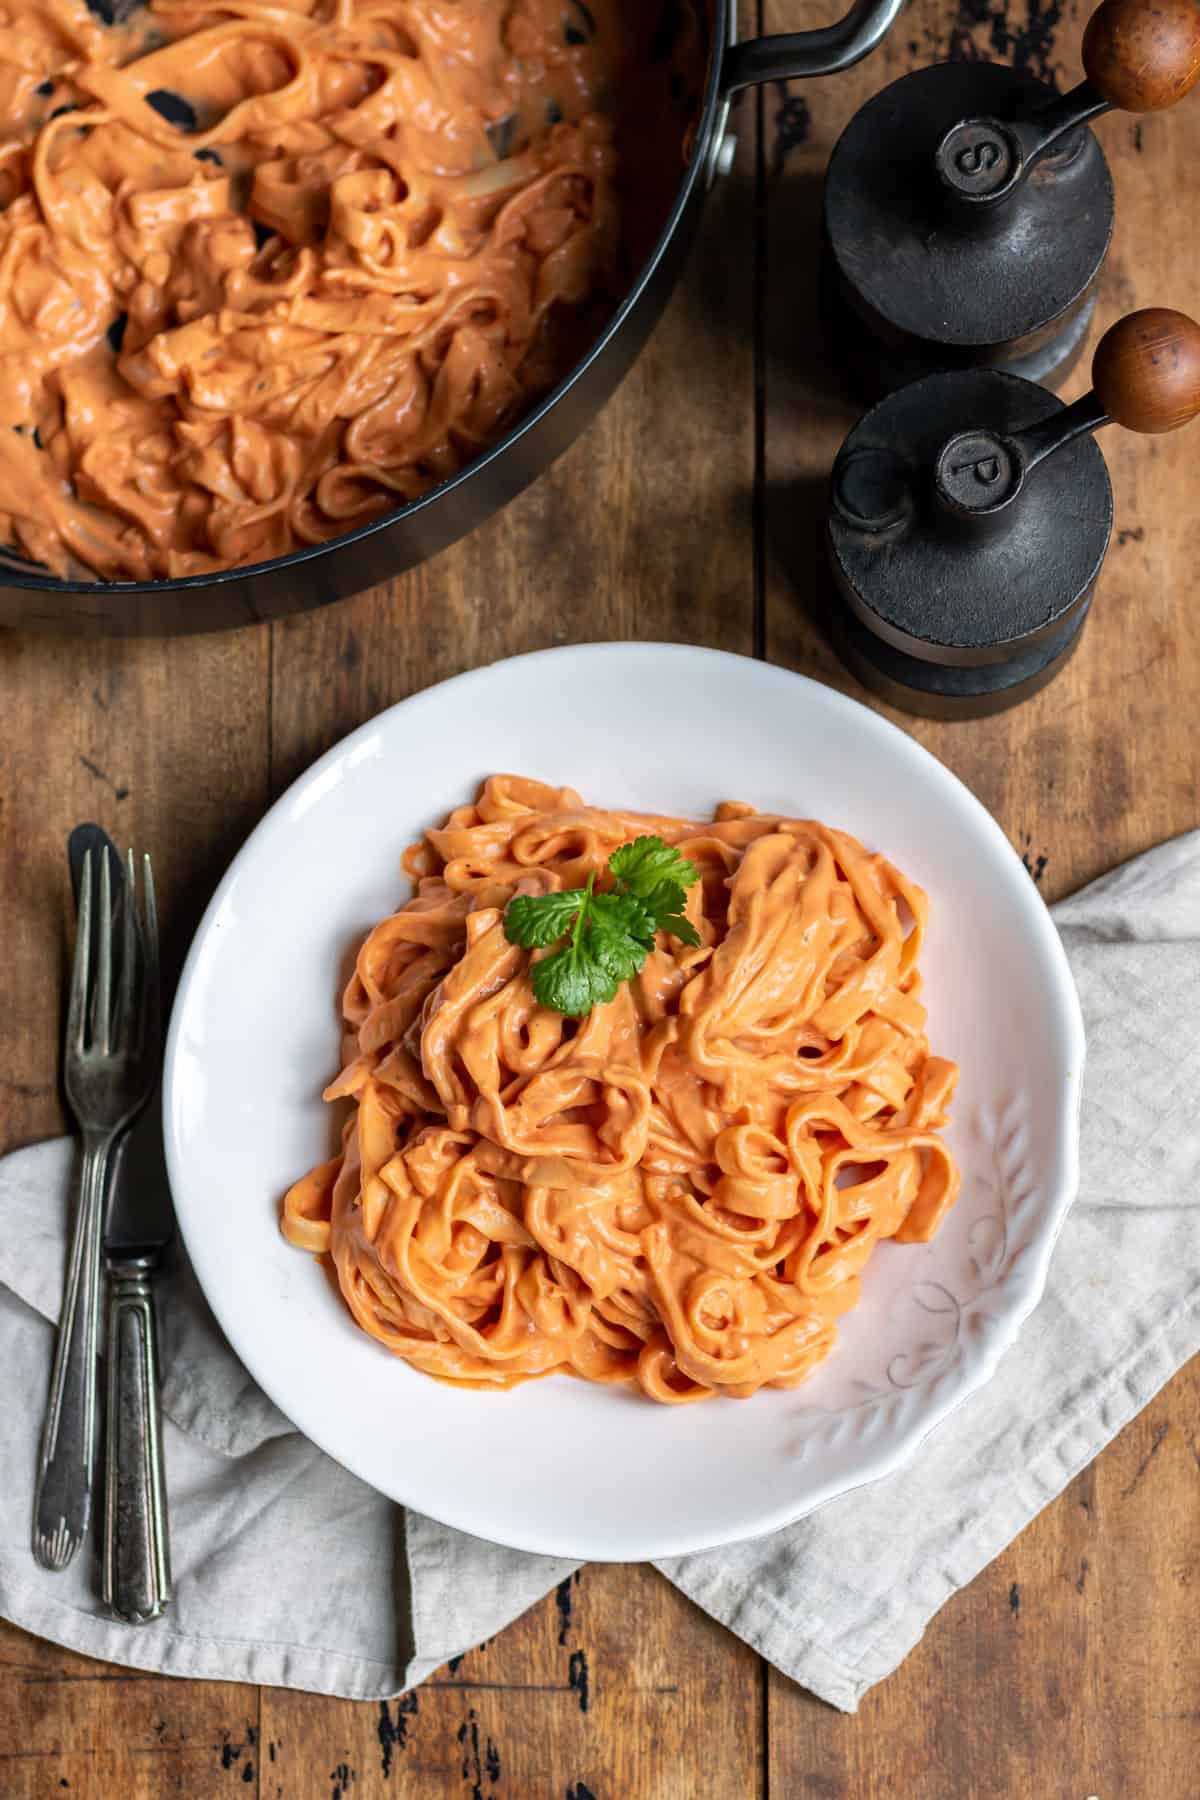 Wooden table with a plate of pink sauce pasta.